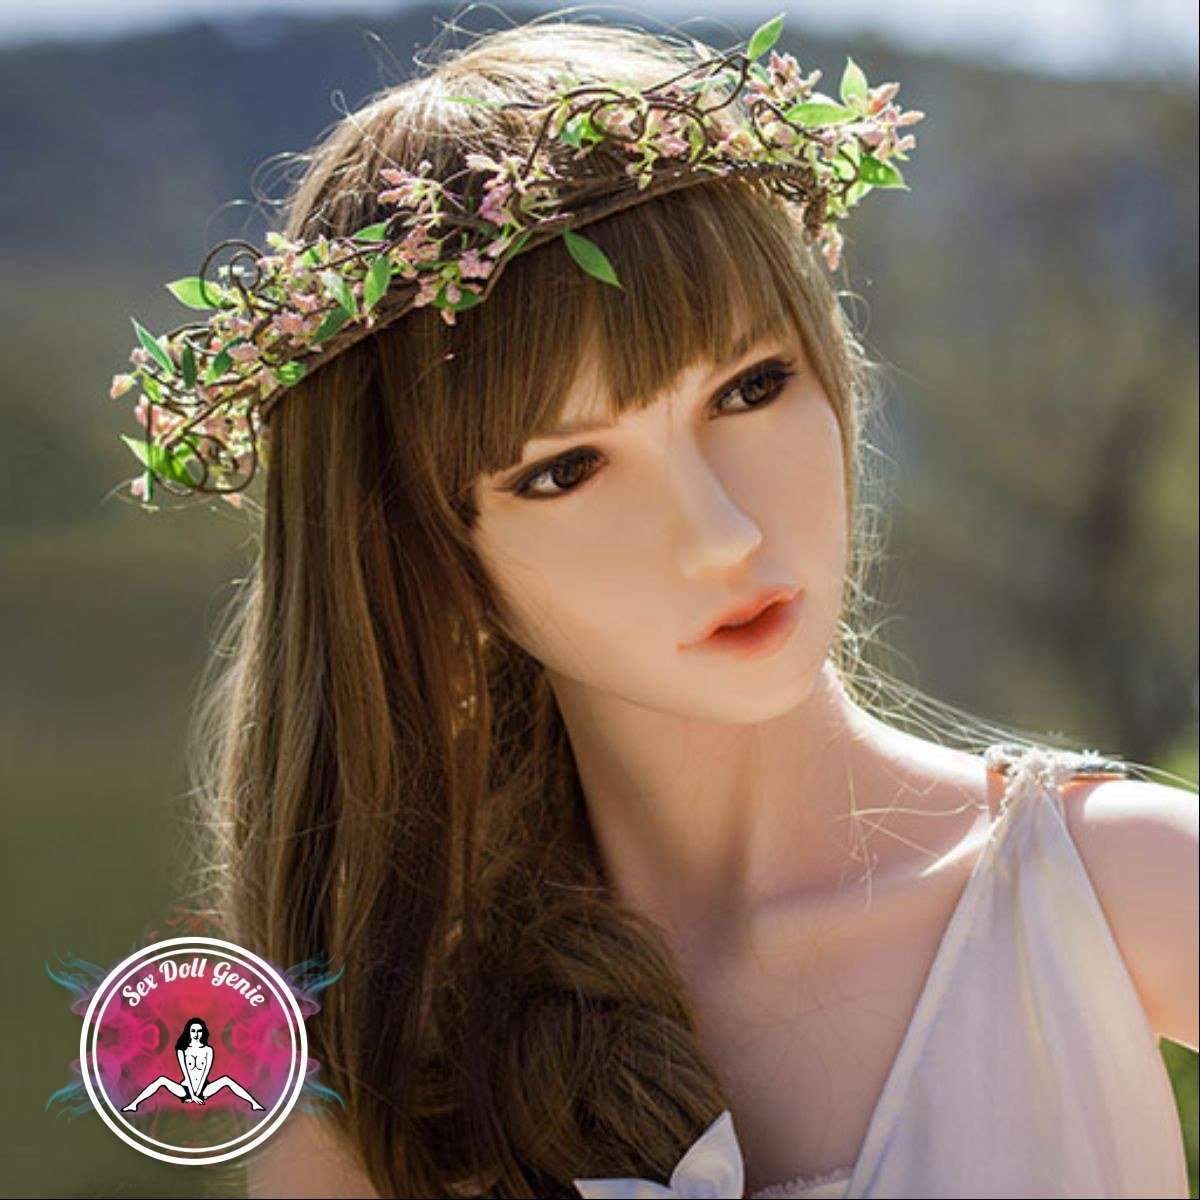 DS Doll - 160Plus - Sandy Head - Type 2 D Cup Silicone Doll-10